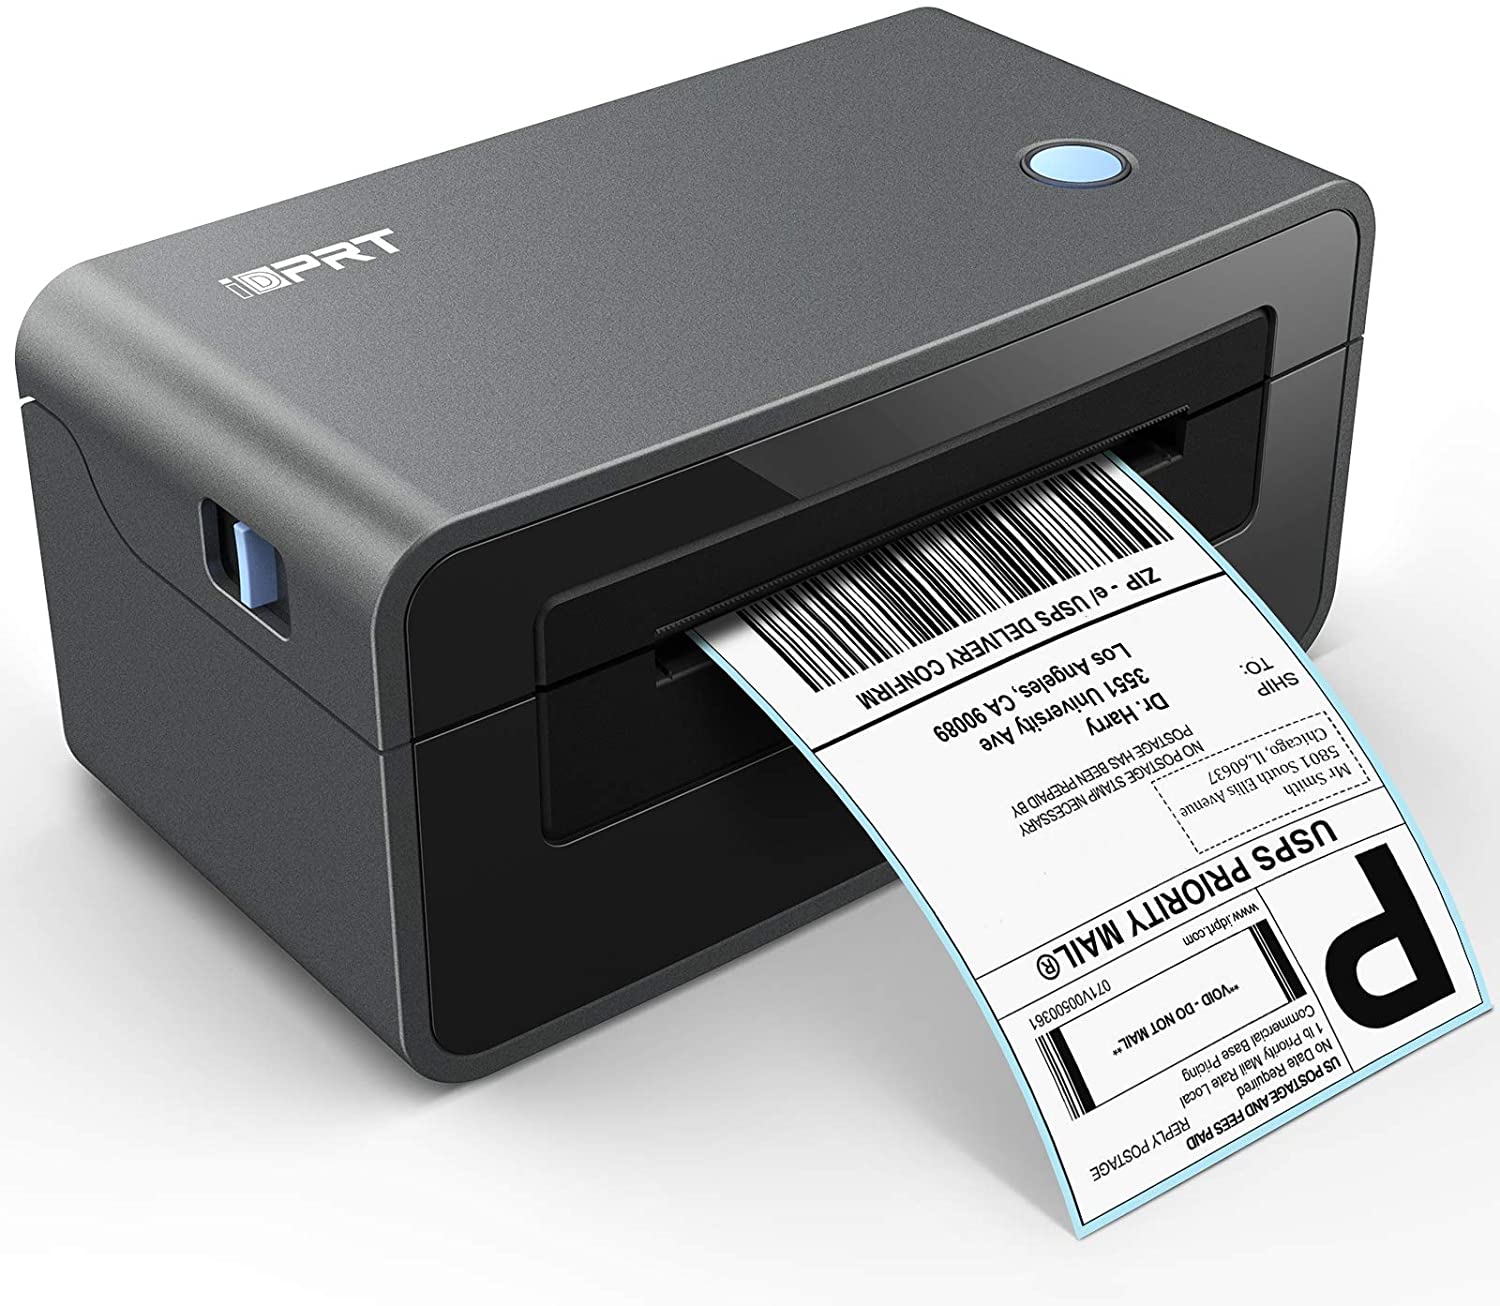 Thermal Label Printer- iDPRT SP410 Thermal Shipping Label Printer, 4x6 Lable Printer, Commercial Direct Thermal Label Maker, Compatible with Shopify, Ebay, Amazon &Etsy, Support Multiple Systems